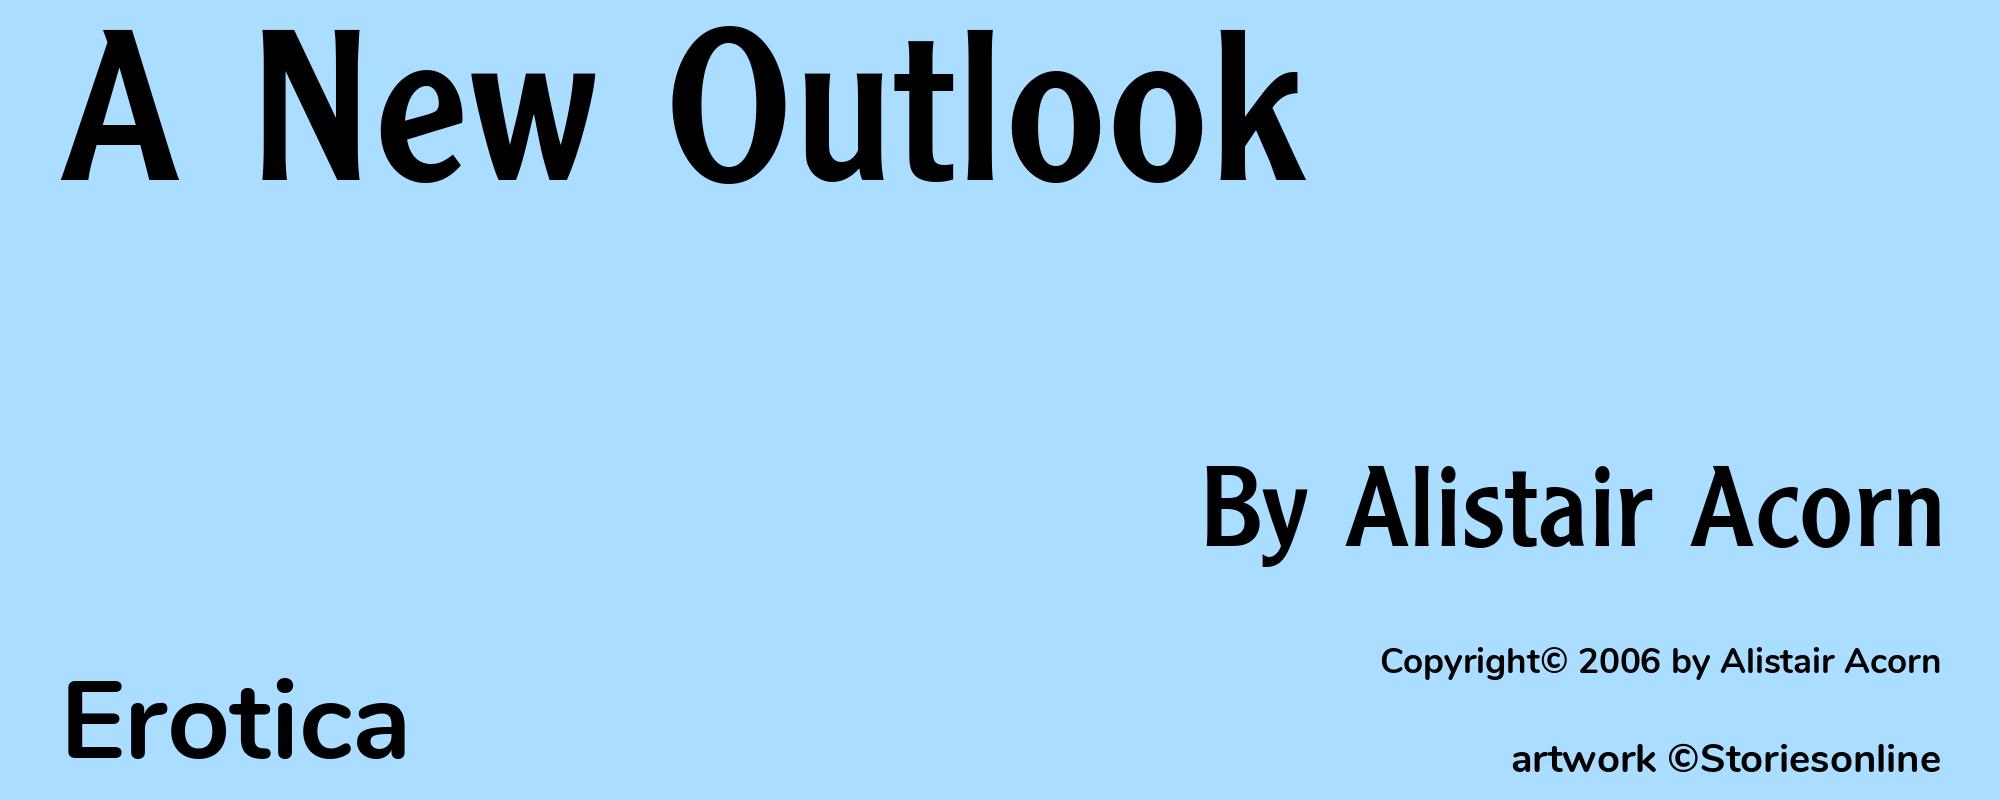 A New Outlook - Cover